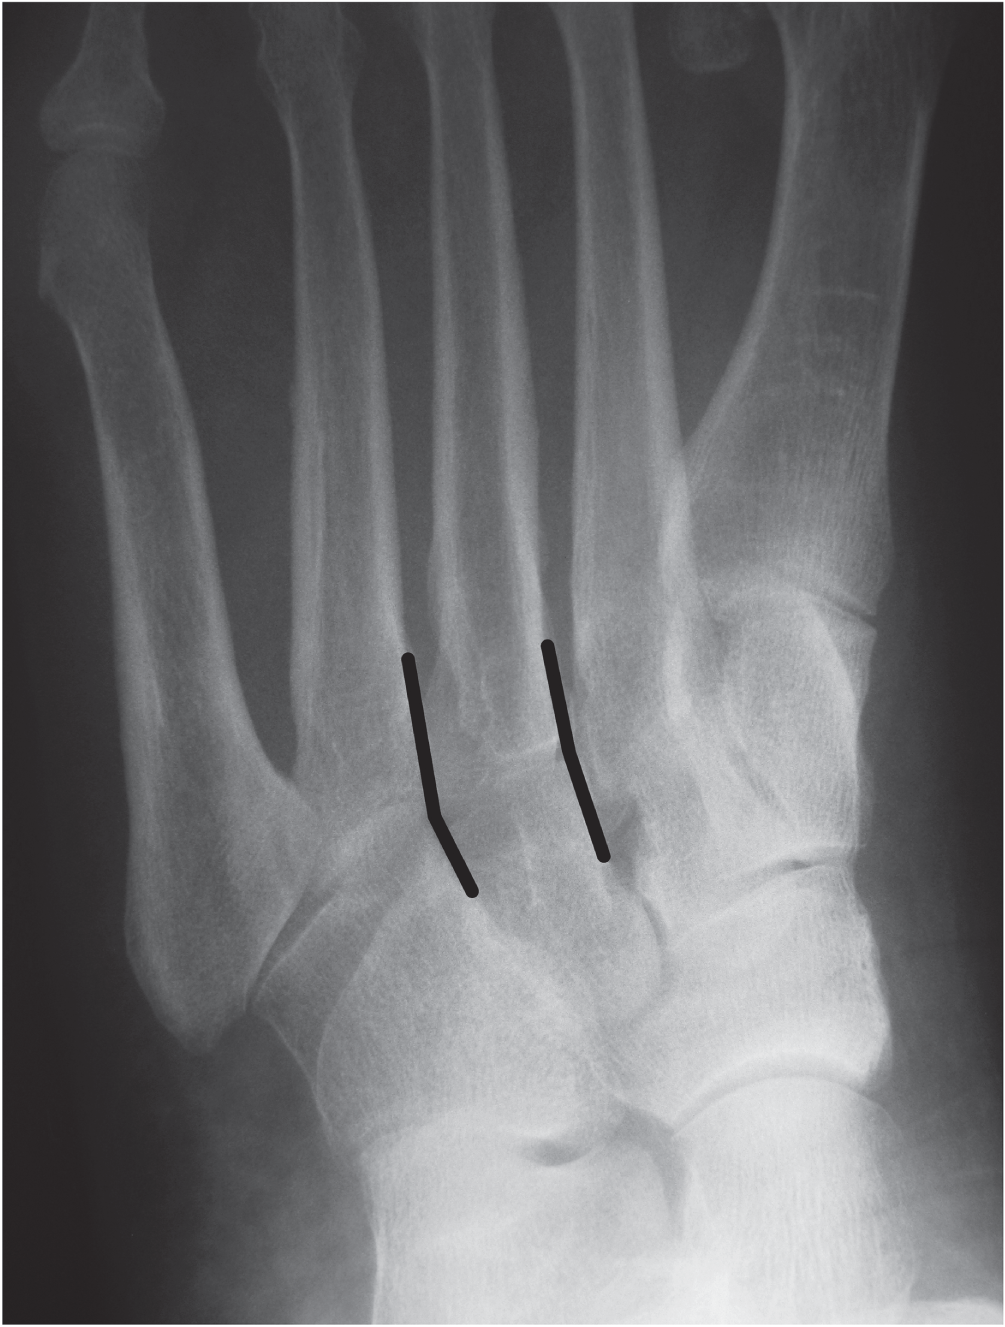 Photo depicts 30° oblique view showing alignment of the medial borders of third metatarsal and the lateral cuneiform as well as the medial borders of the fourth metatarsal and the cuboid bone.